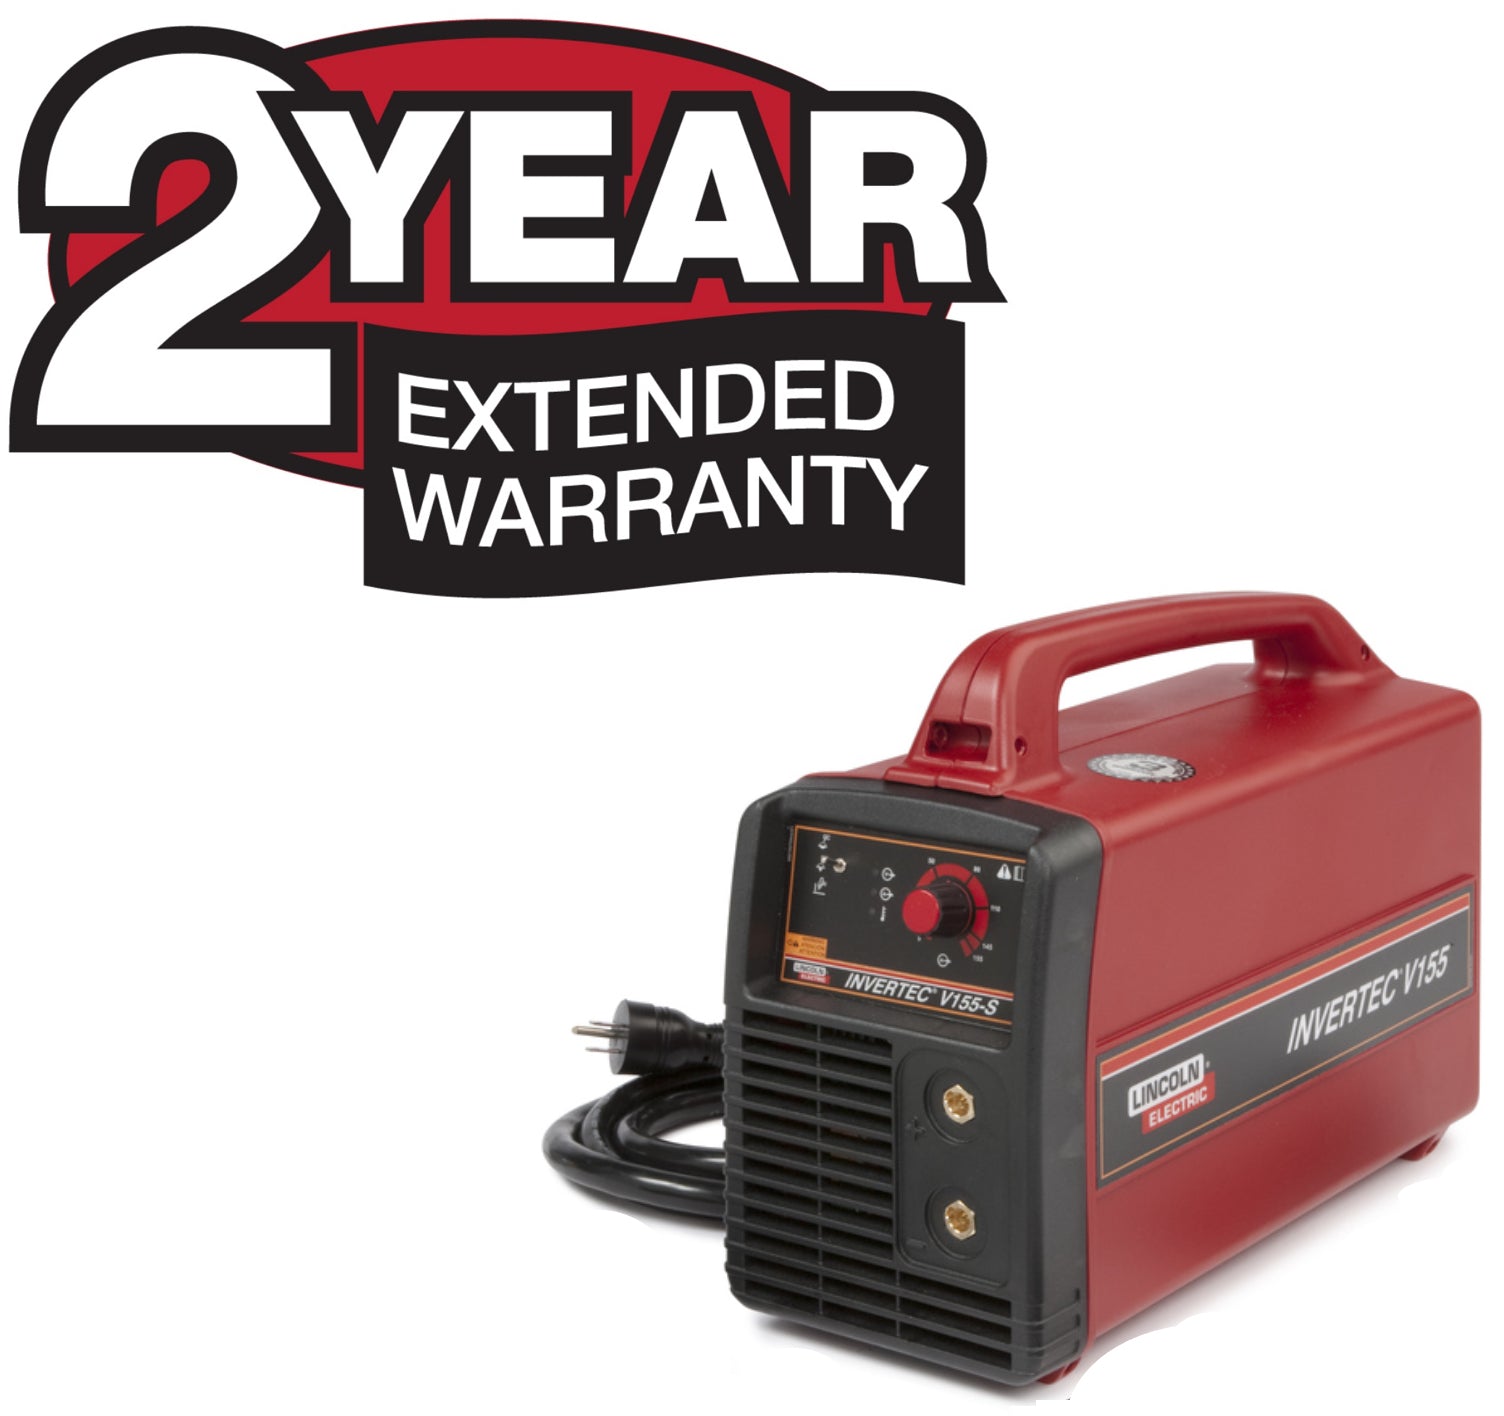 Lincoln 2-Year Extended Warranty - Invertec V155-S X2605